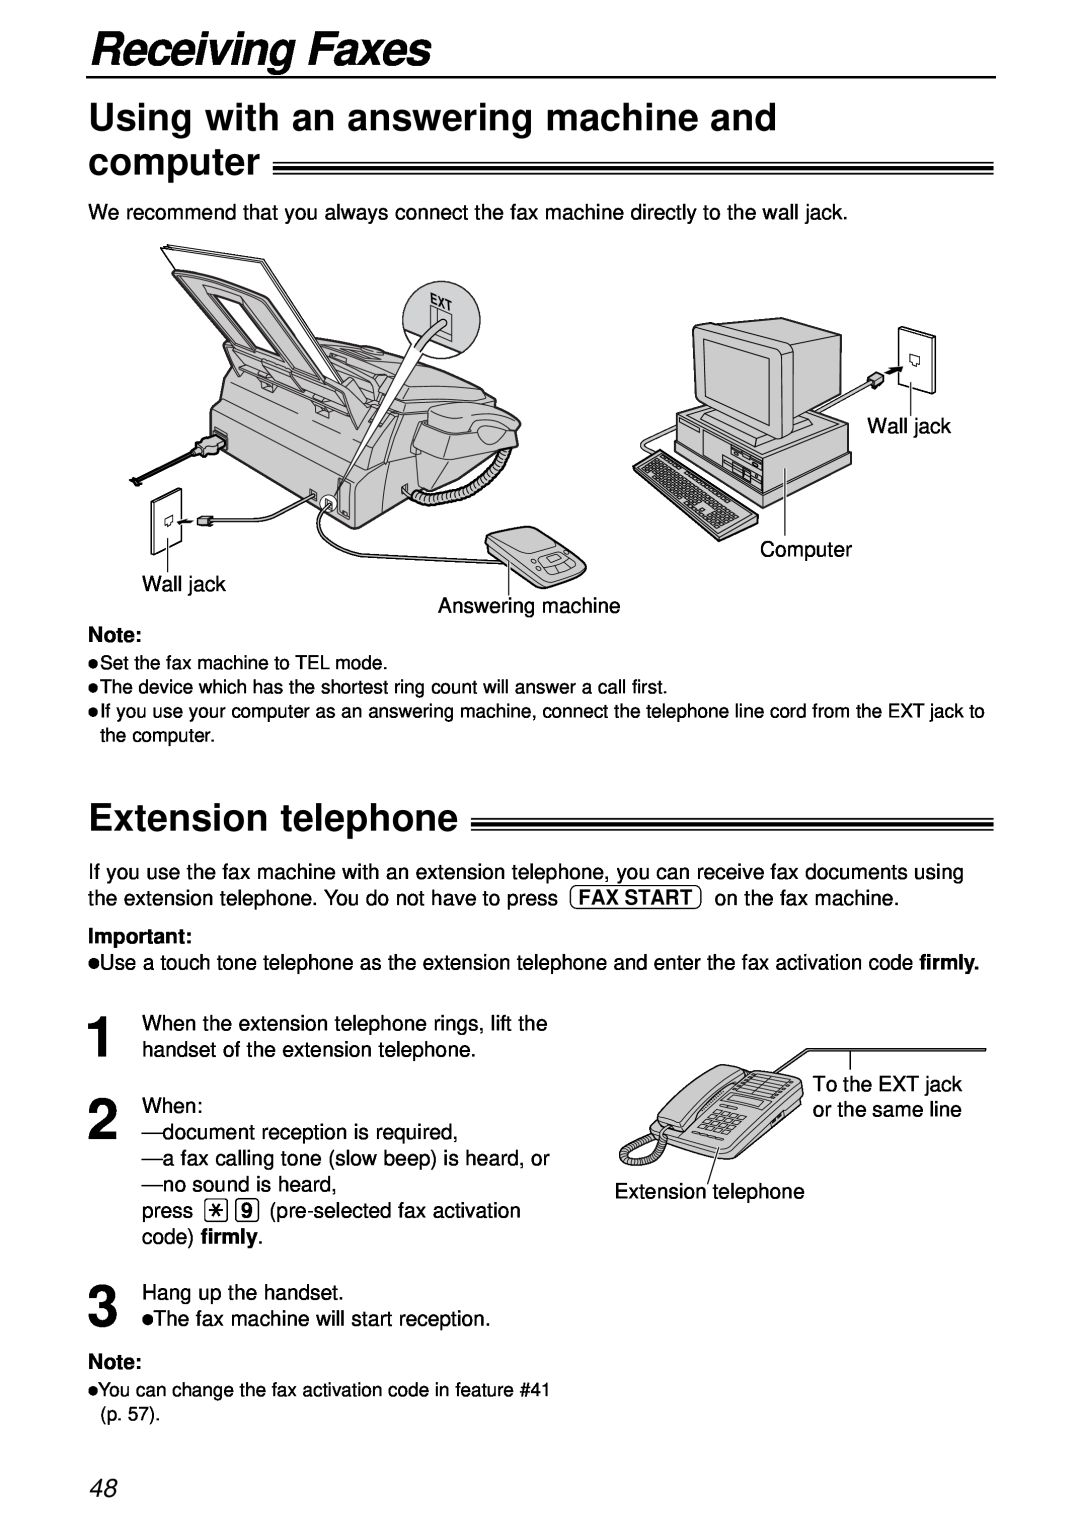 Panasonic KX-FL501 manual Using with an answering machine and computer, Extension telephone, Receiving Faxes 